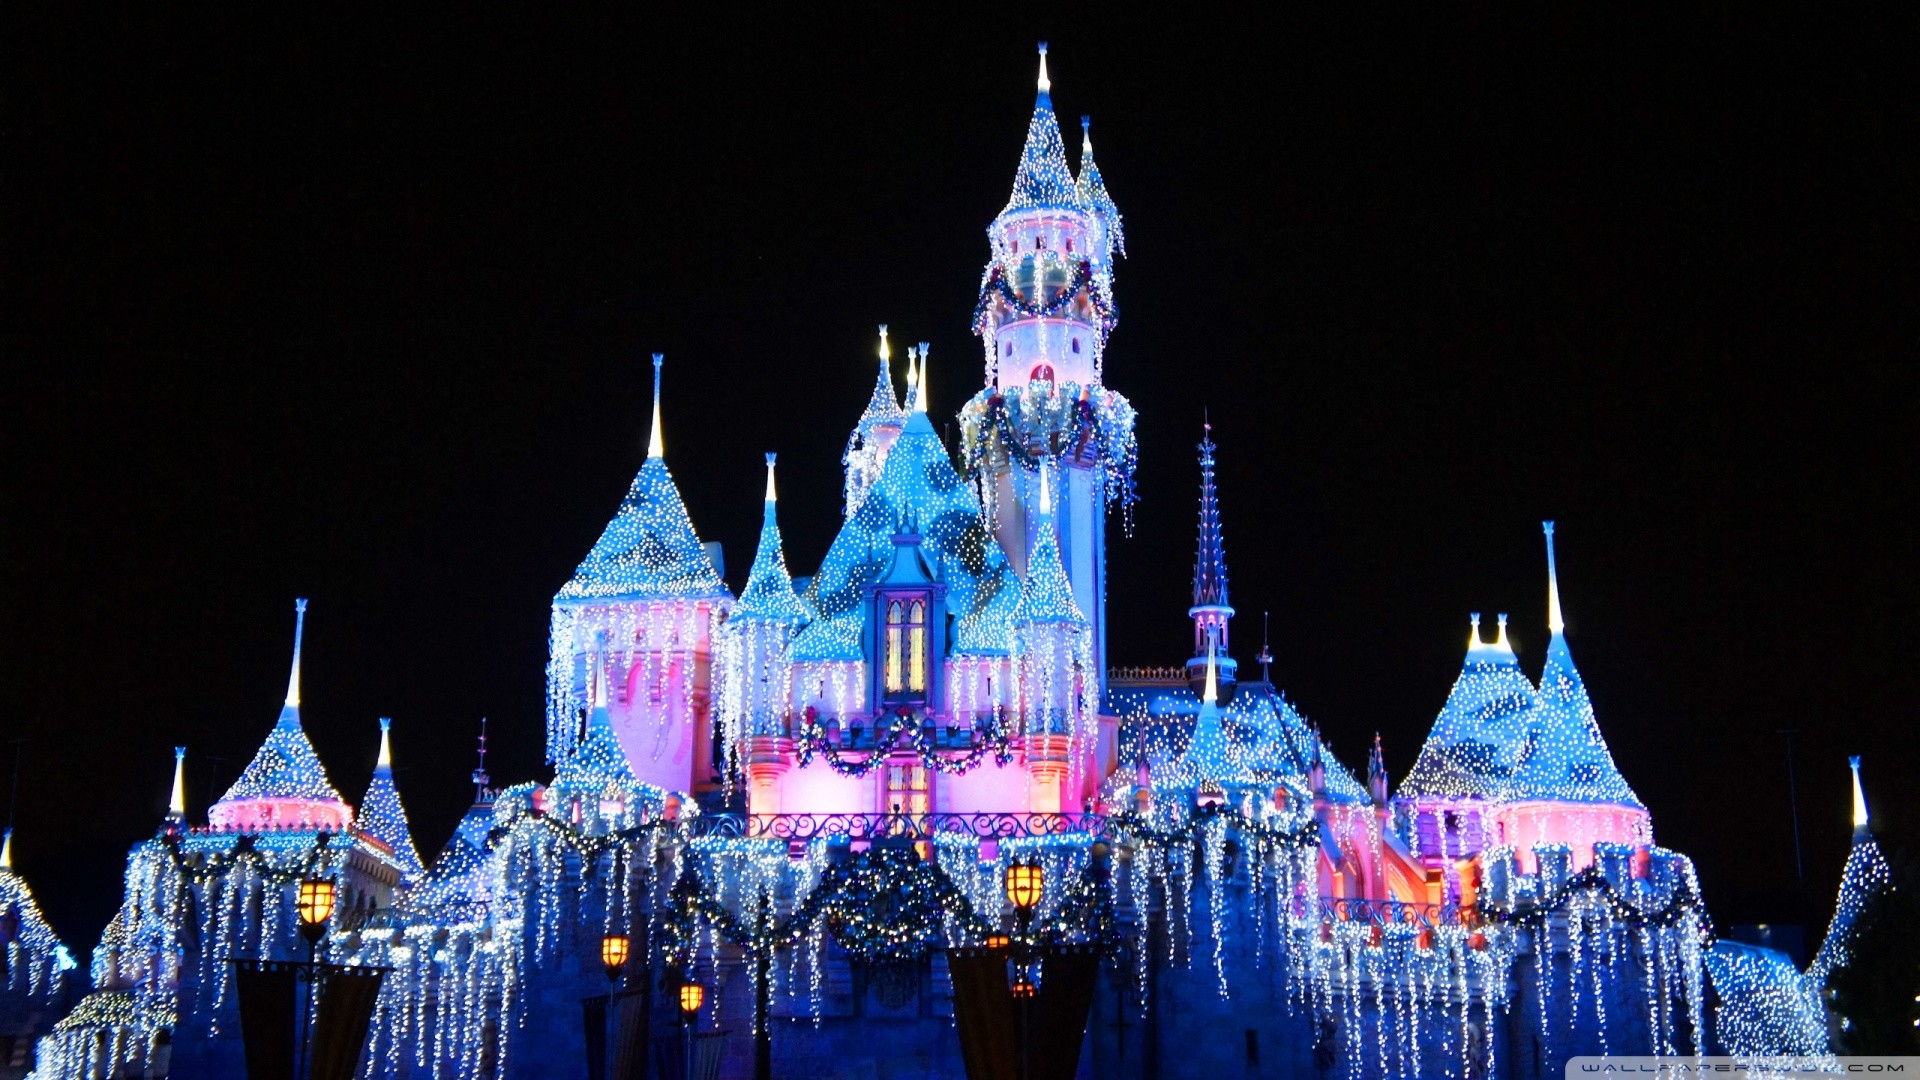 1920x1080 Download Disney Castle Wallpaper Free pictures in high definition or .